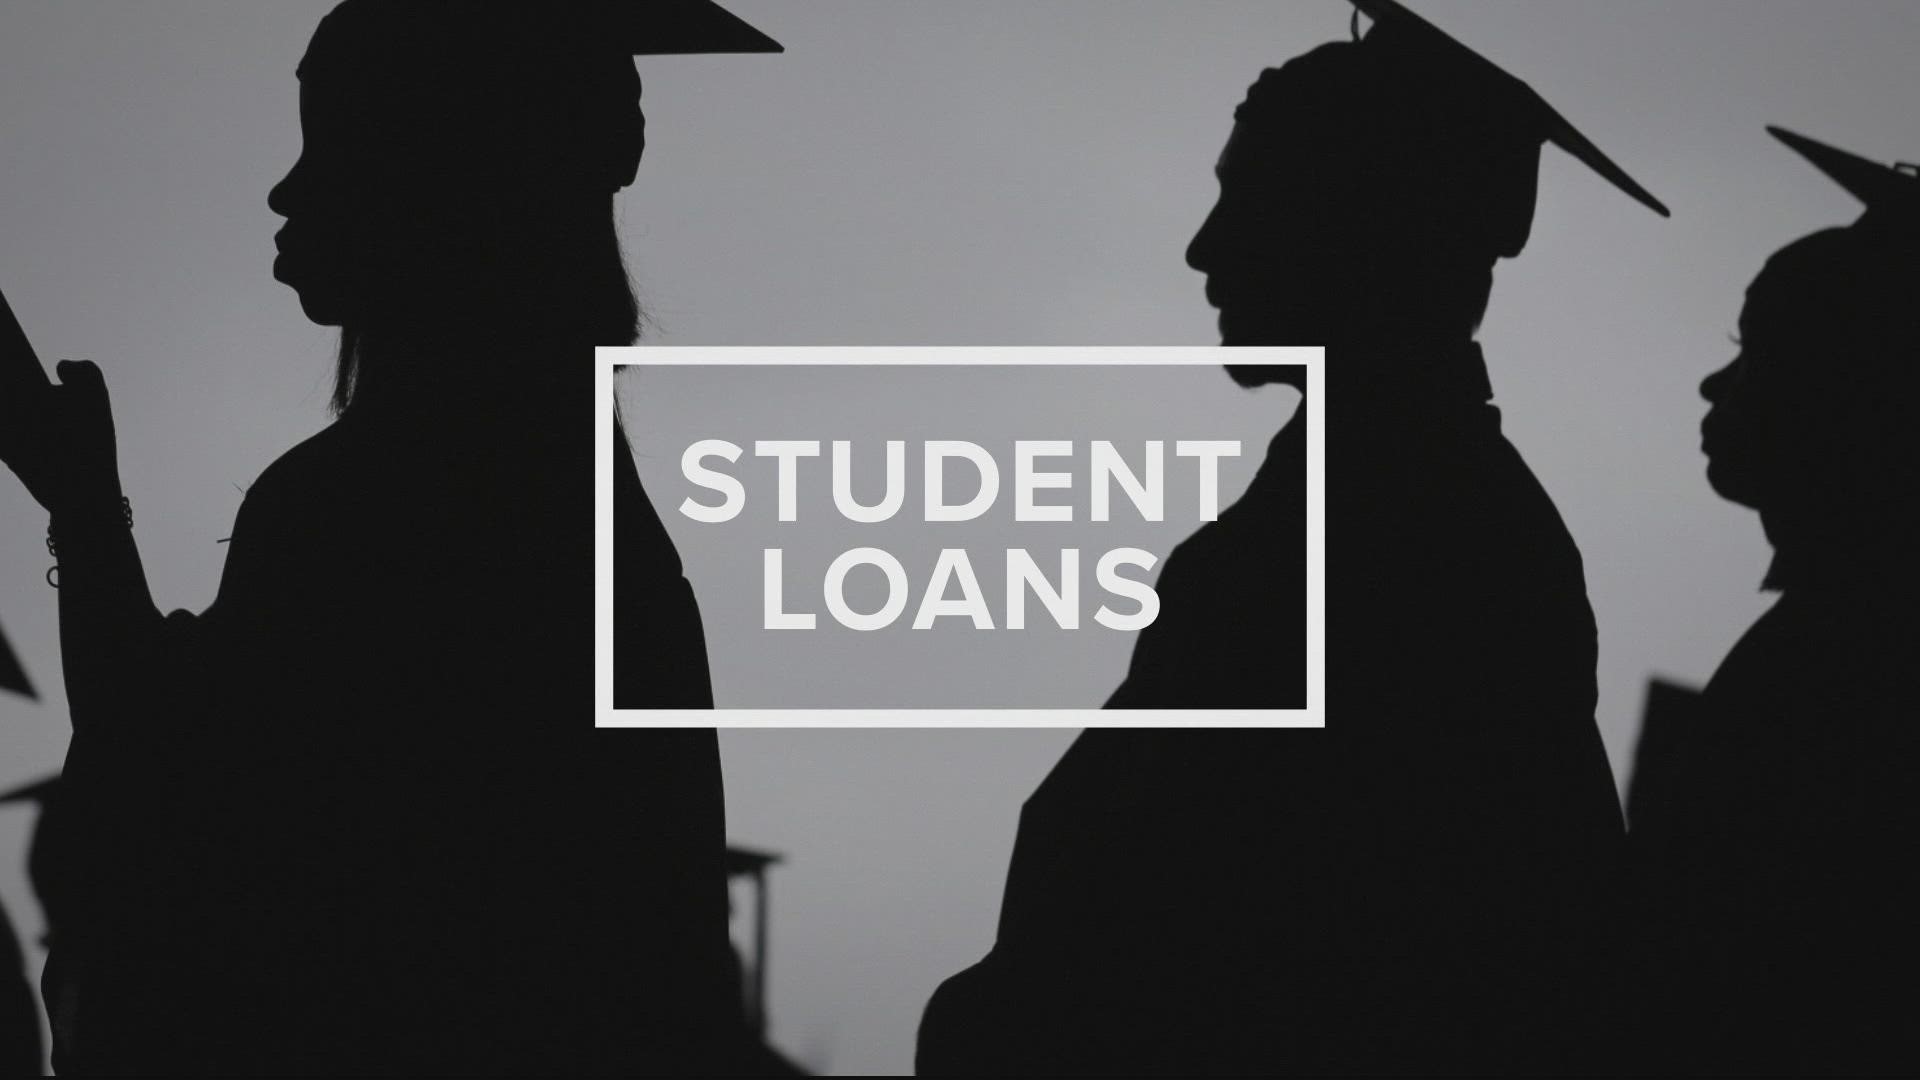 If you're looking to get some relief on student loans, make sure you set some time aside to get your application in. It'll set you back about five minutes, according